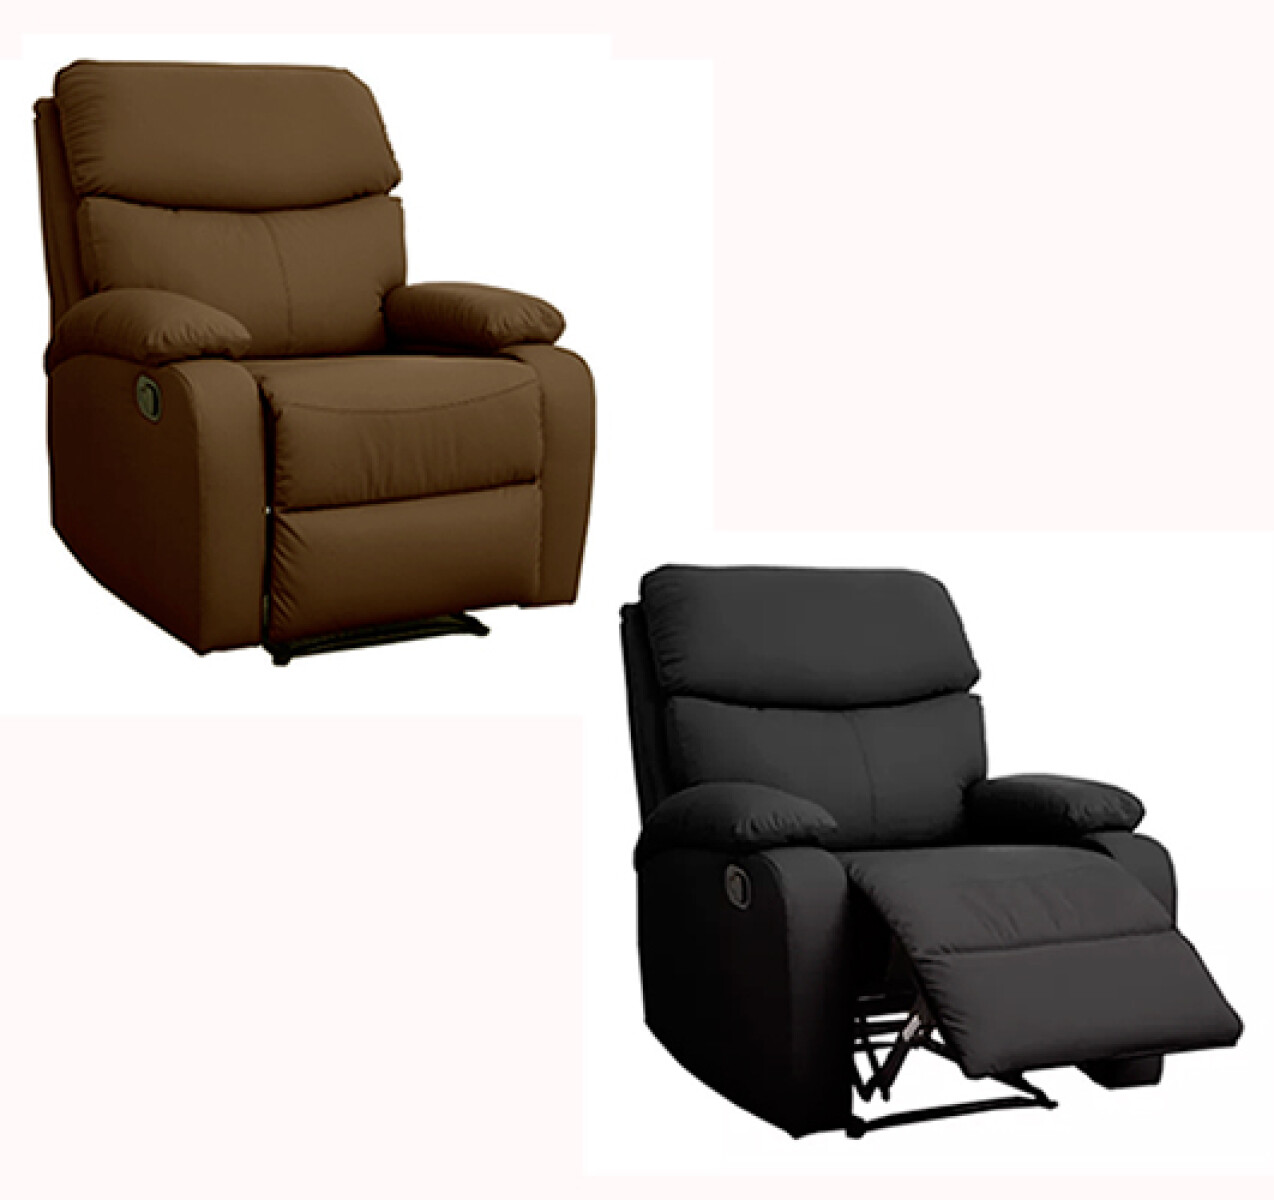 POLTRONA 1C MDS Reclinable -Giselle - Sin color 